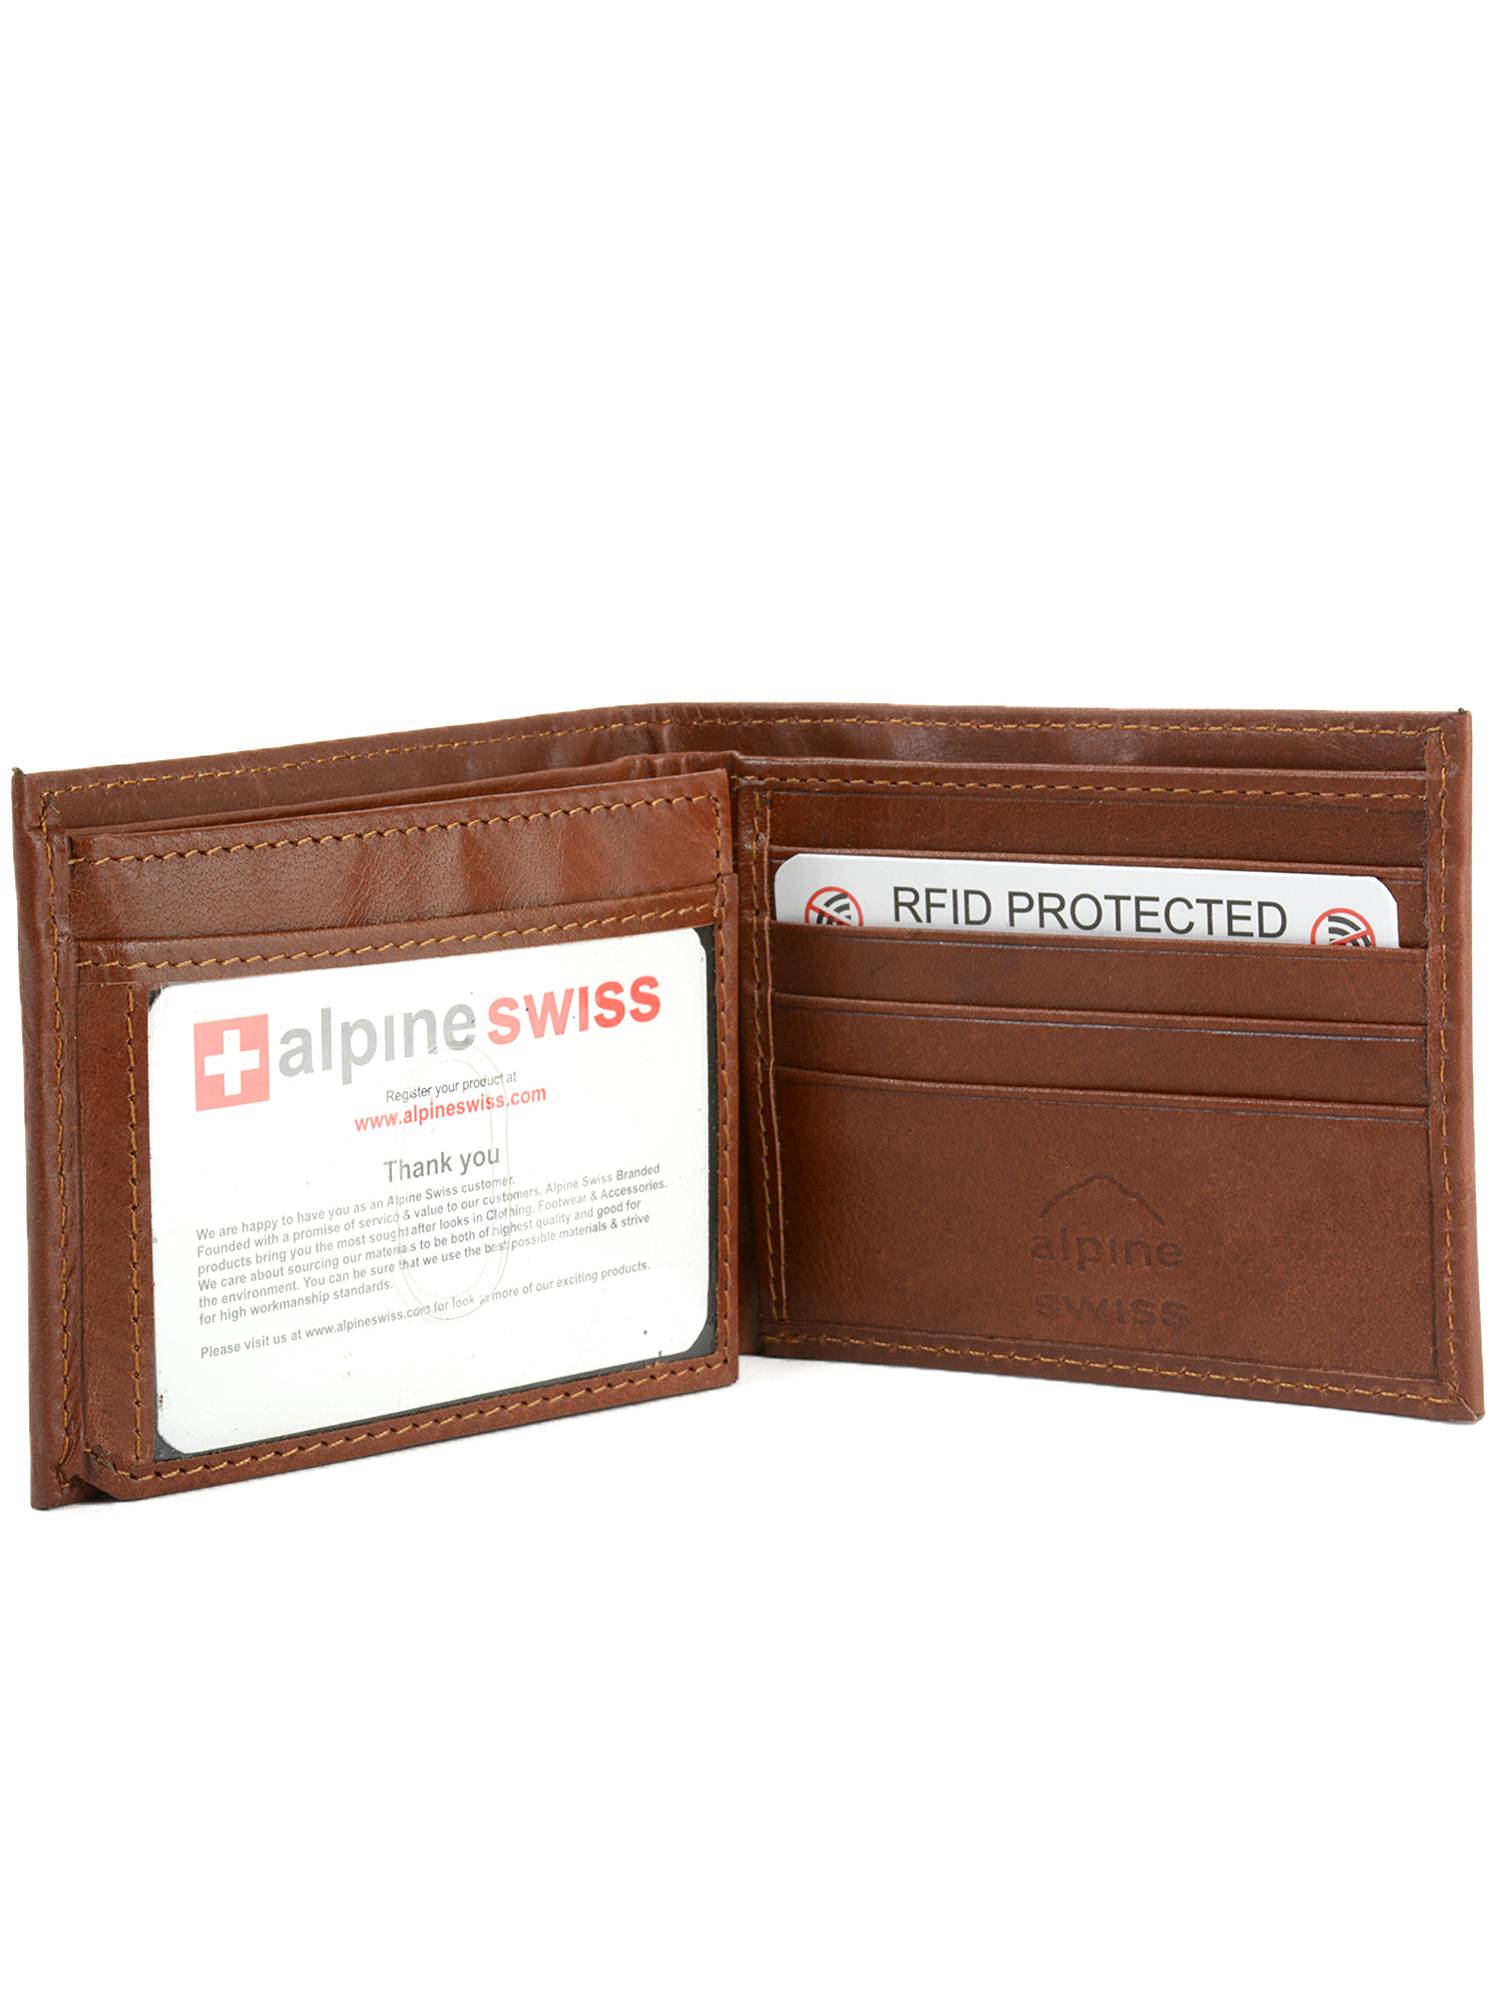 Alpine Swiss Mens Leather RFID Bifold Wallet 2 ID Windows Divided Bill Section - image 3 of 7